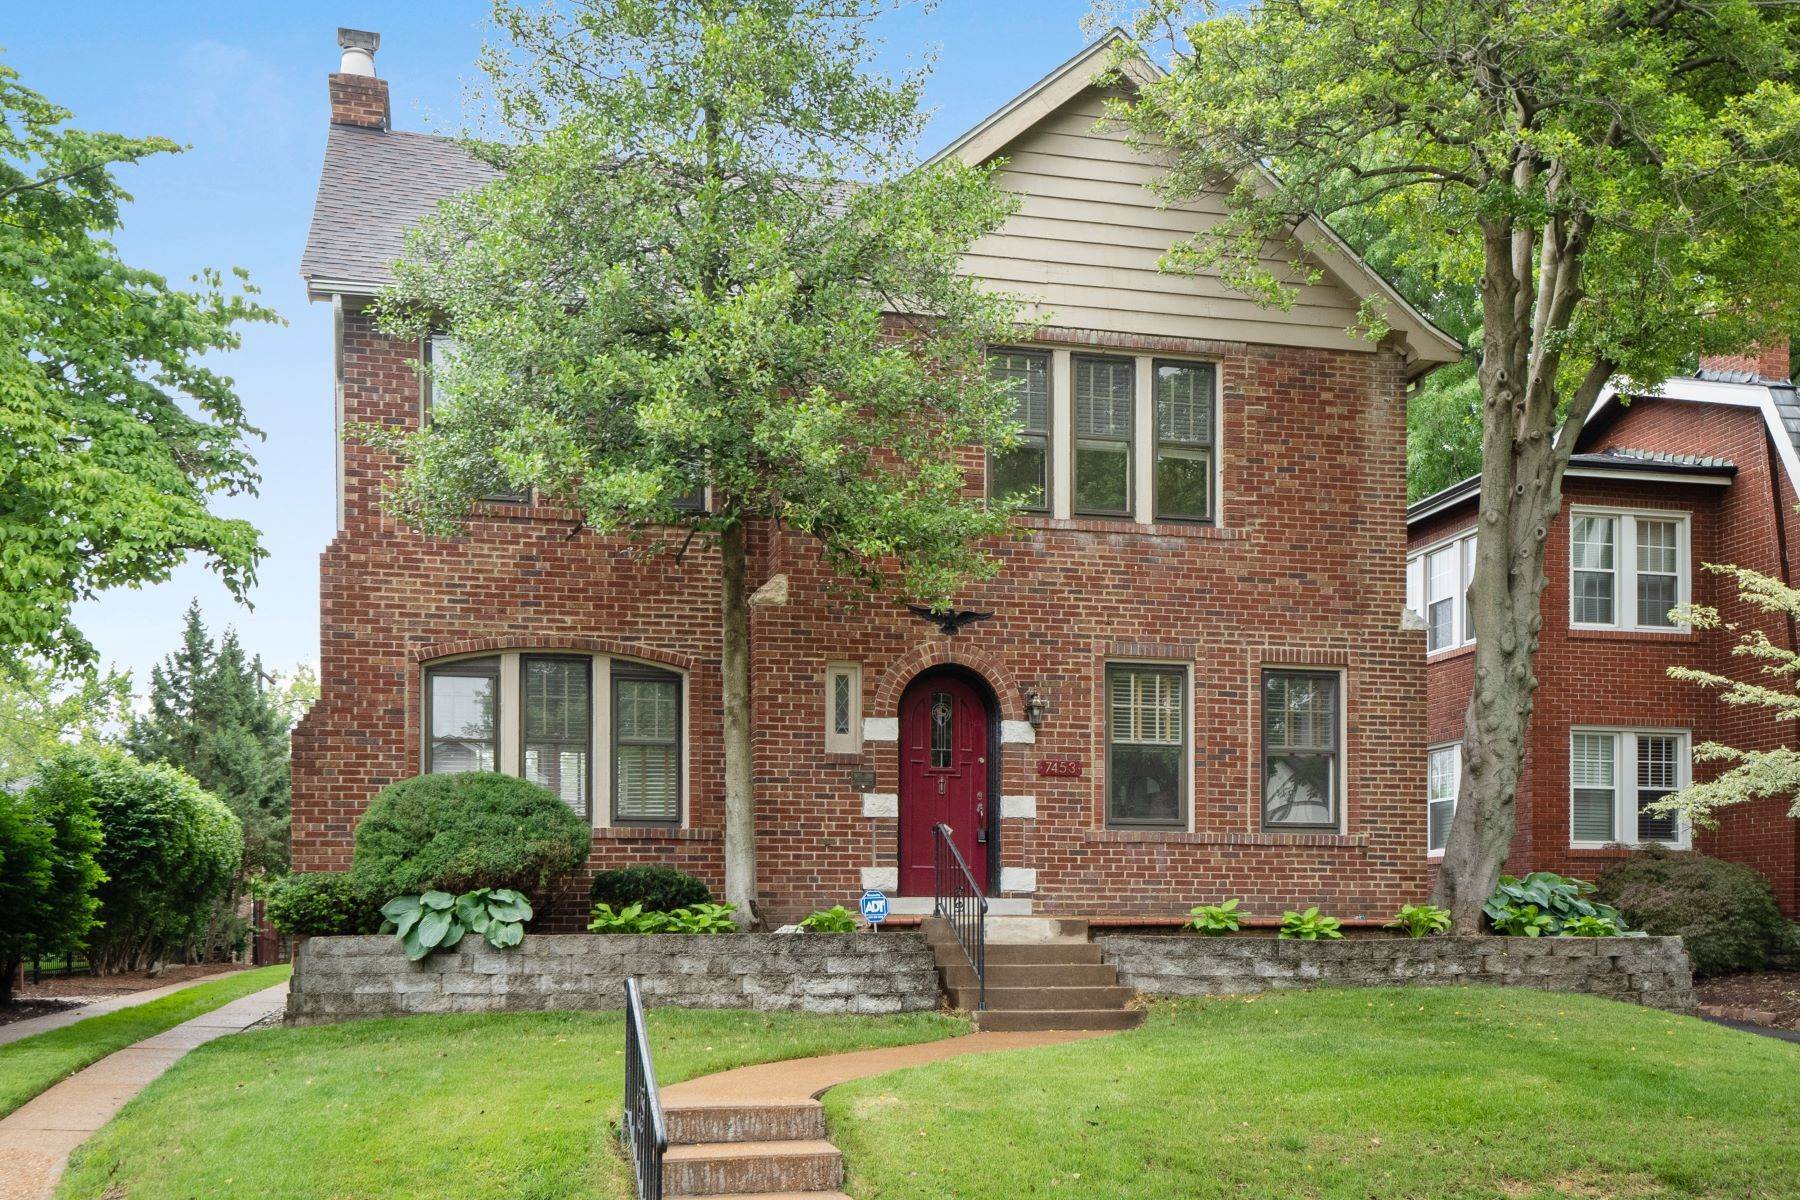 Single Family Homes for Sale at A Classic University City Home on a Highly Sought-After Street 7453 Teasdale Avenue University City, Missouri 63130 United States